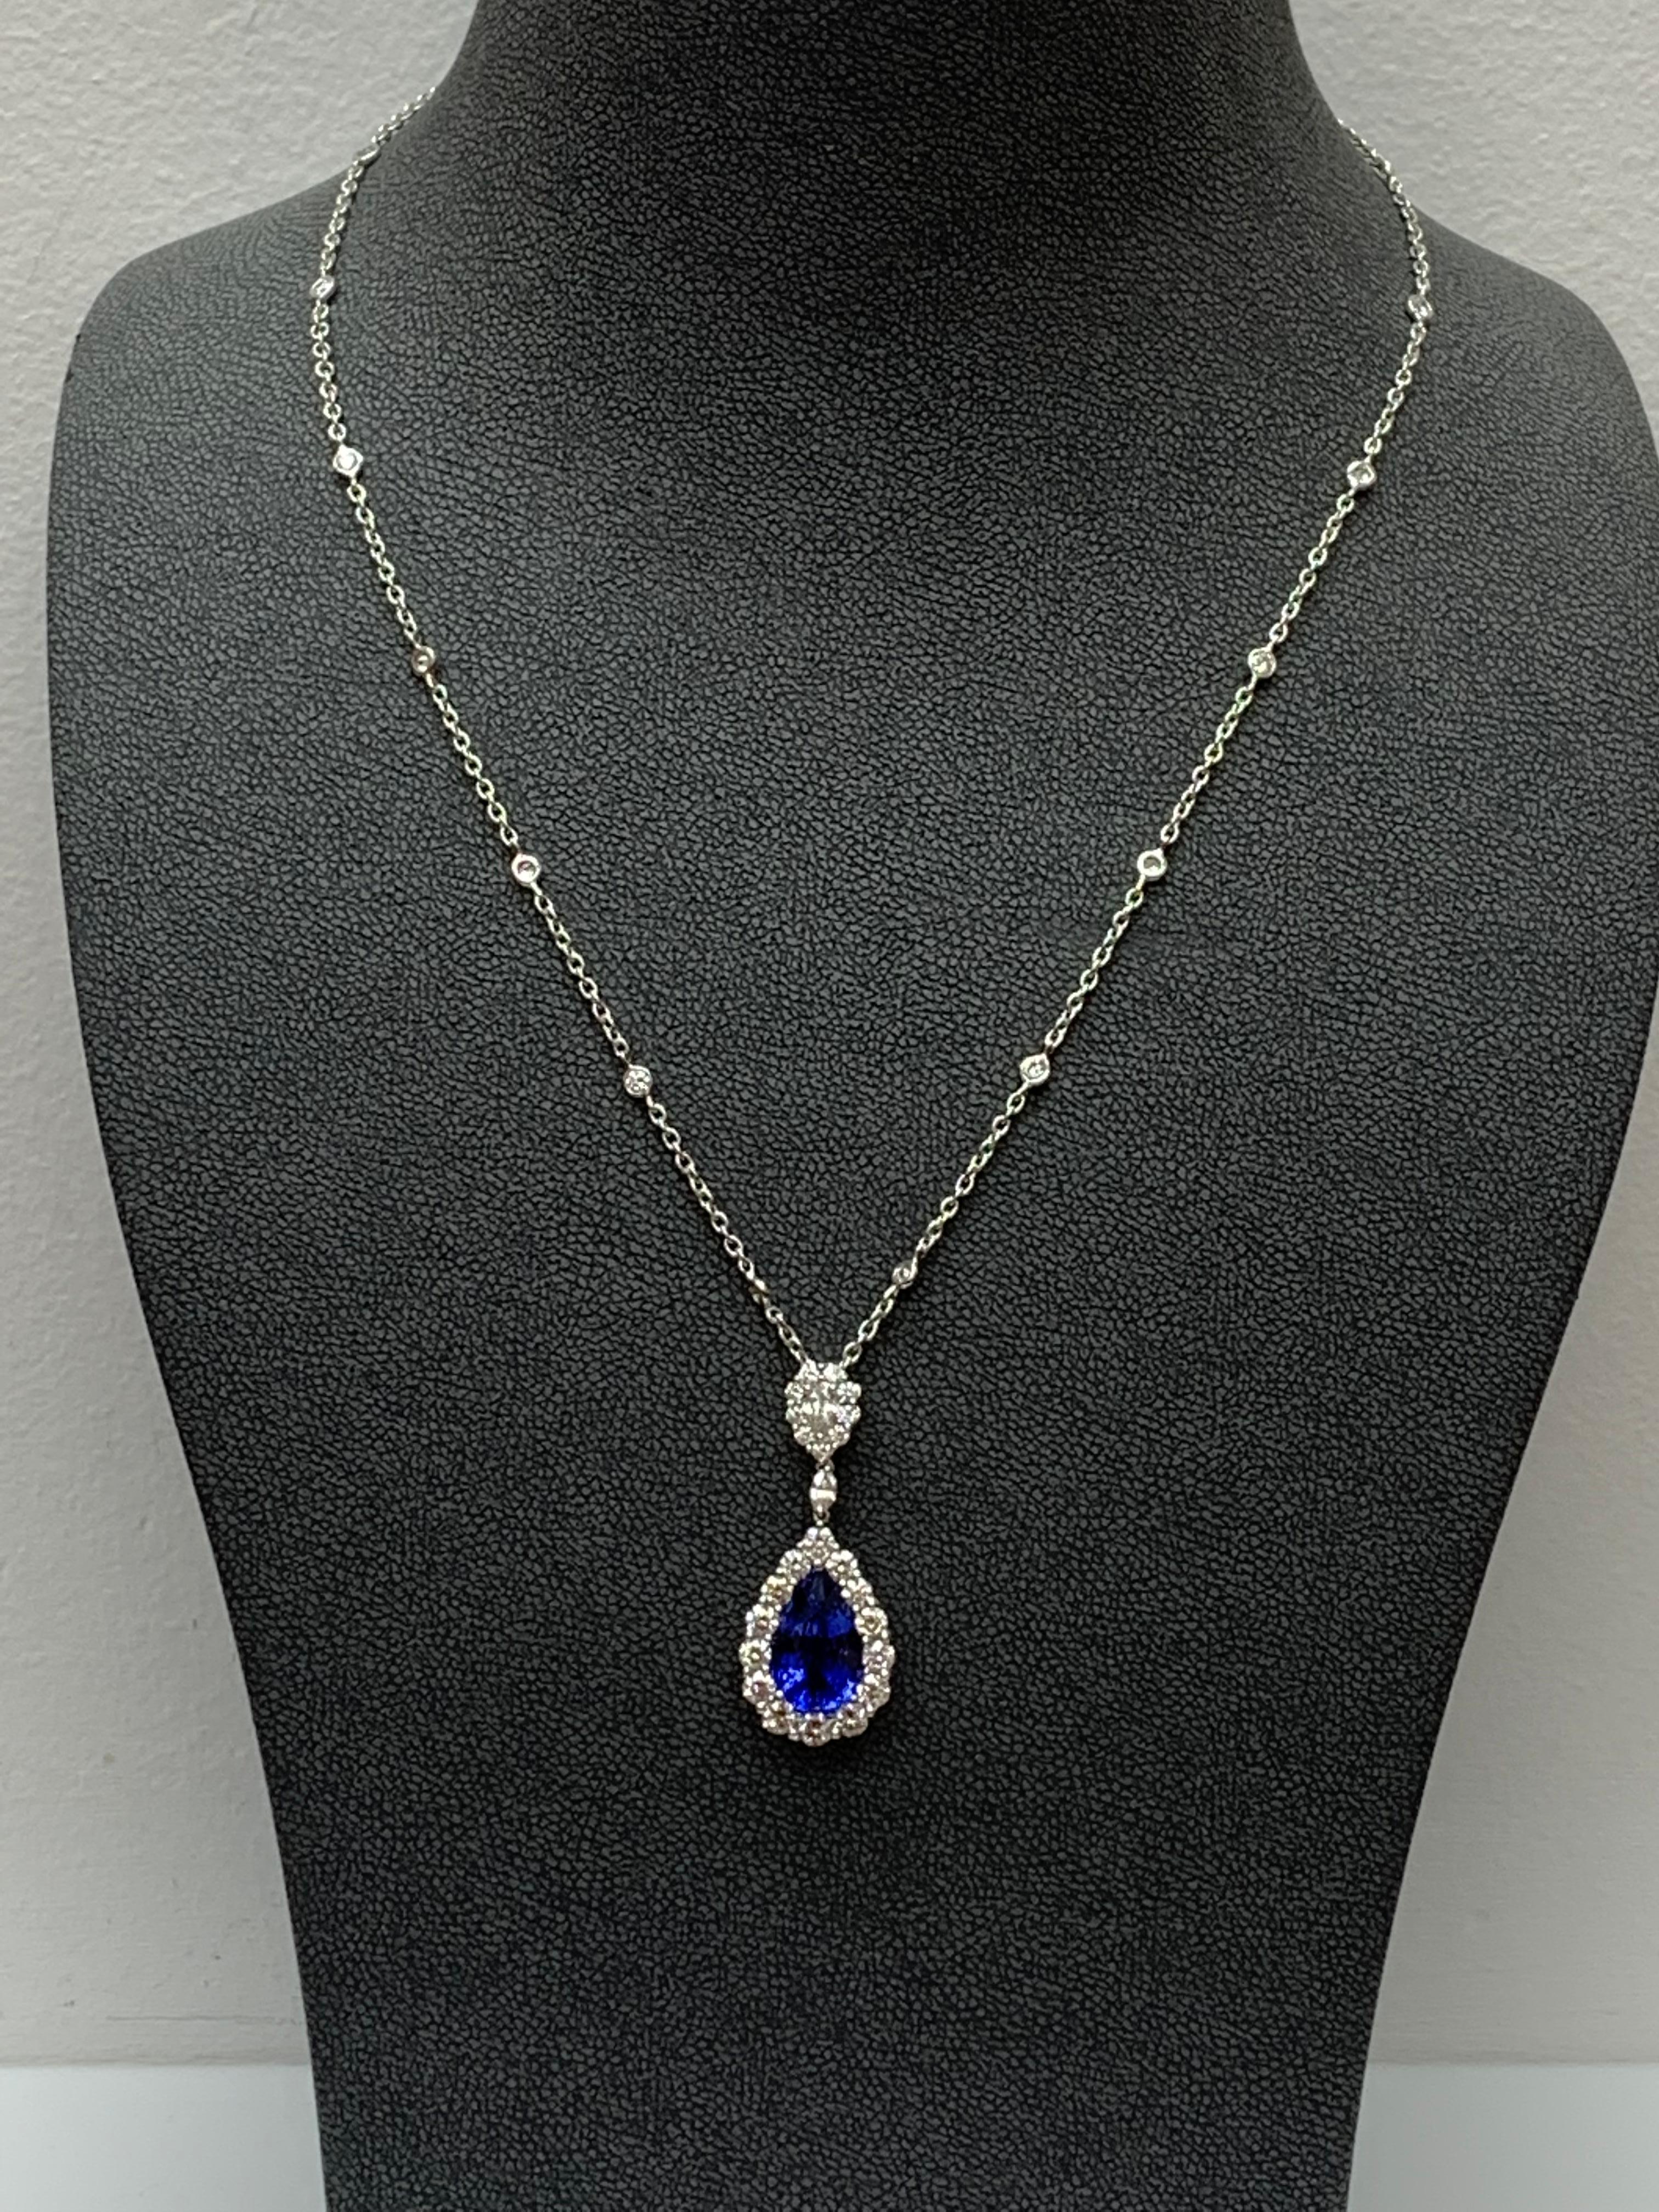 4.35 Carat Pear shape Sapphire and Diamond Drop Necklace in 18K White Gold For Sale 6